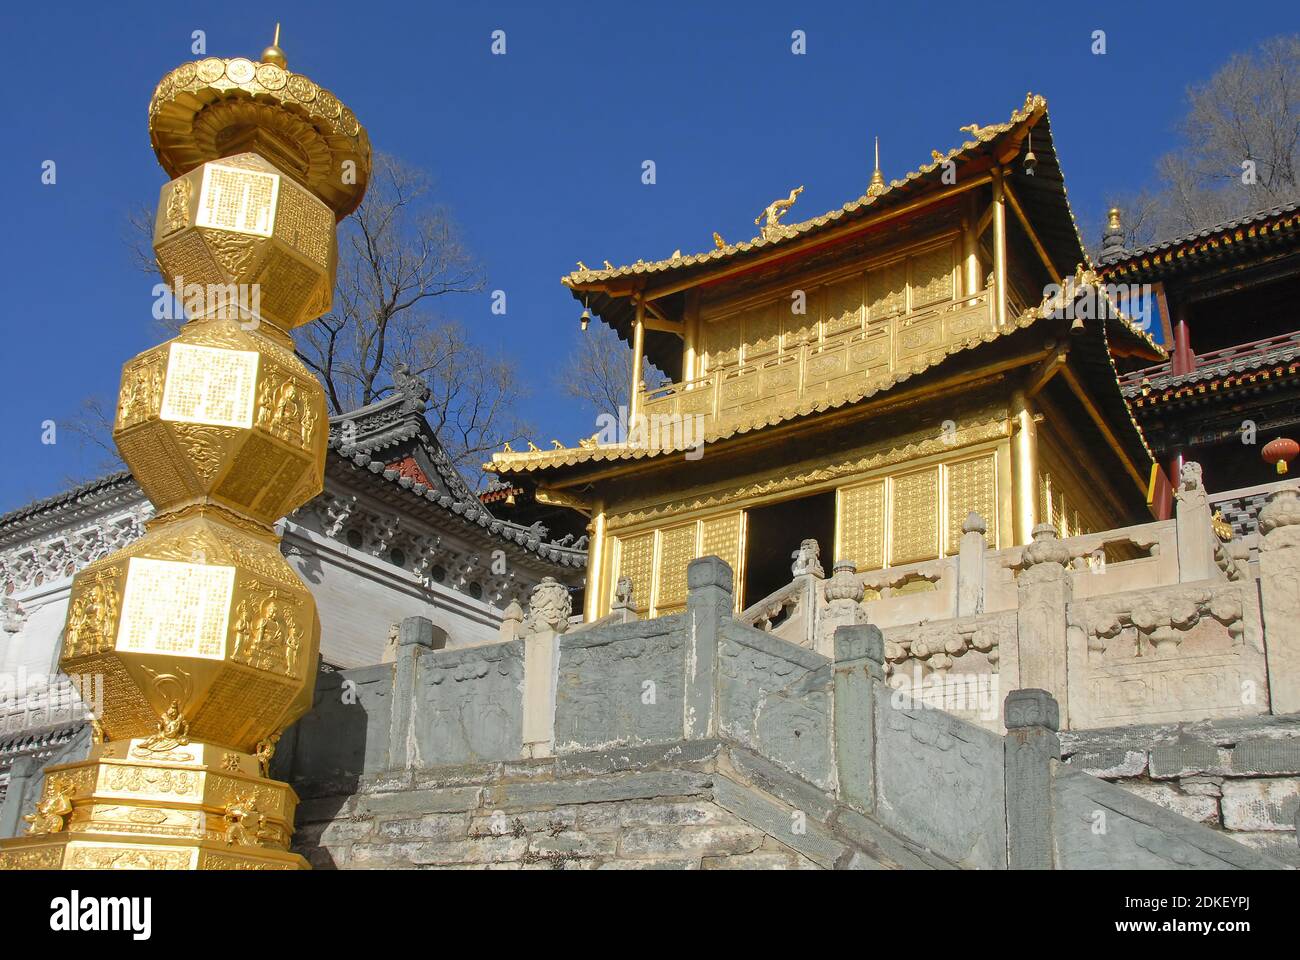 Wutaishan, Shanxi Province in China. This is the Copper Hall (or Bronze Hall) at Xiantong Temple in Wutai Mountain. Stock Photo